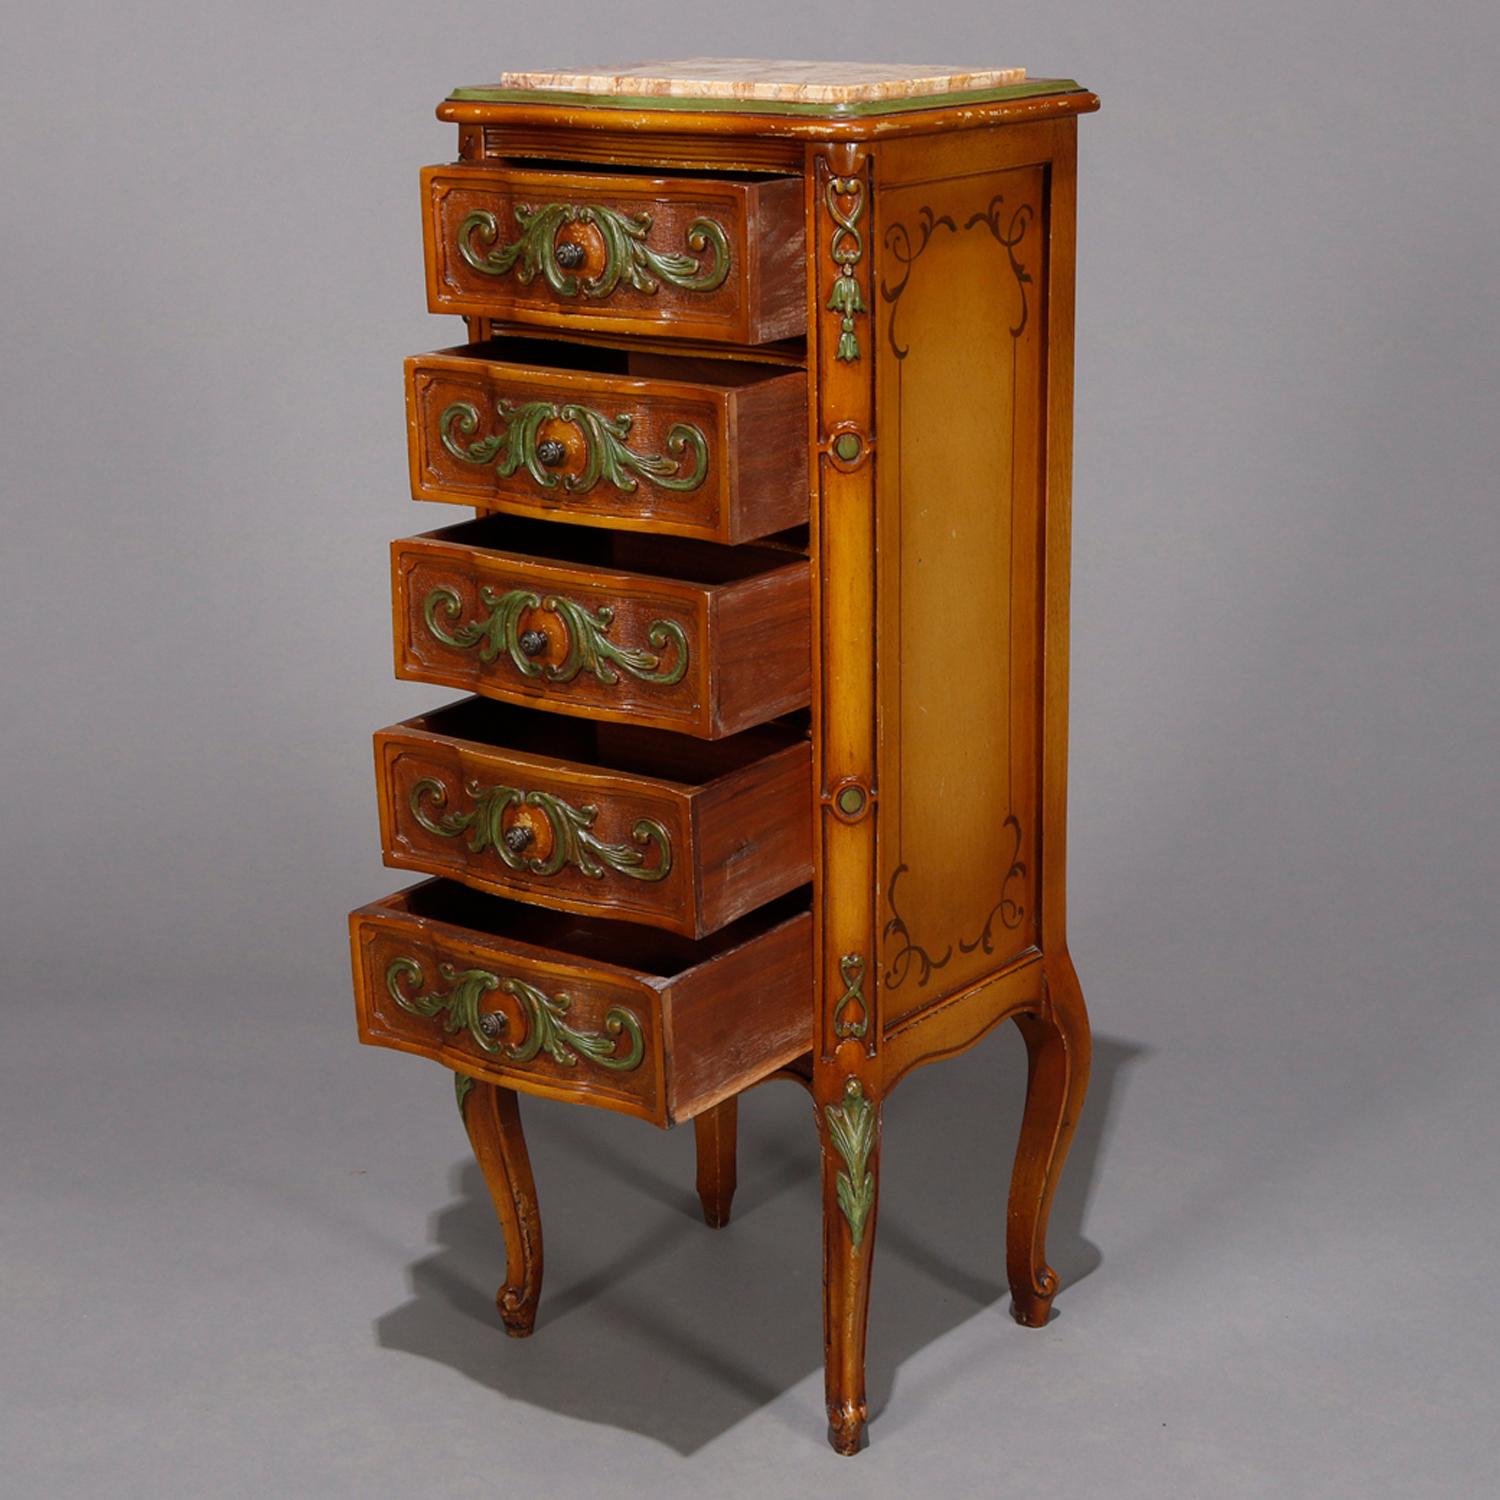 A vintage Italian lingerie chest offers marble top over maple case having five stacked drawers and paint decorated with scroll, foliate and acanthus elements, raised on cabriole legs terminating in stylized scroll form feet, c1940

***DELIVERY